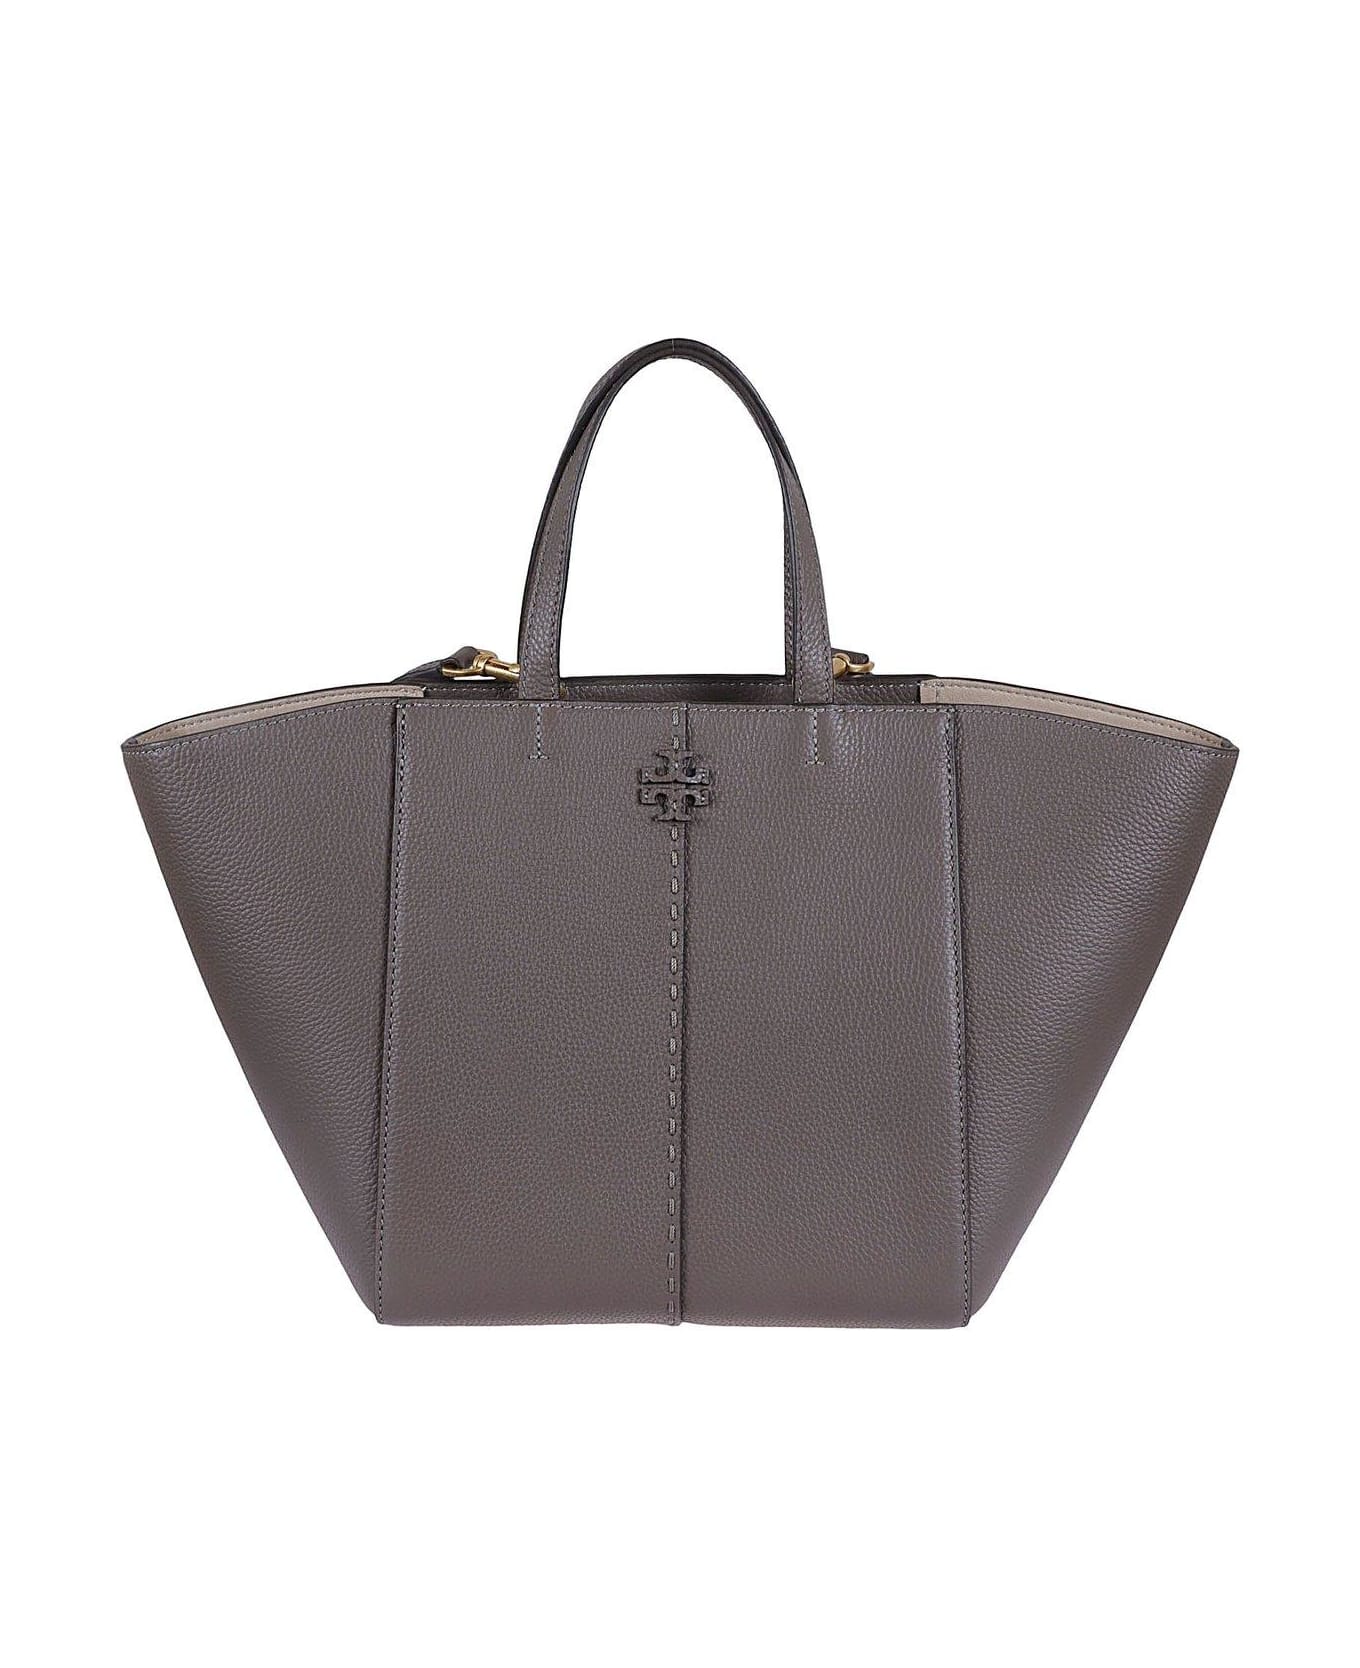 Tory Burch Double T Tote Bag - Silver Maple